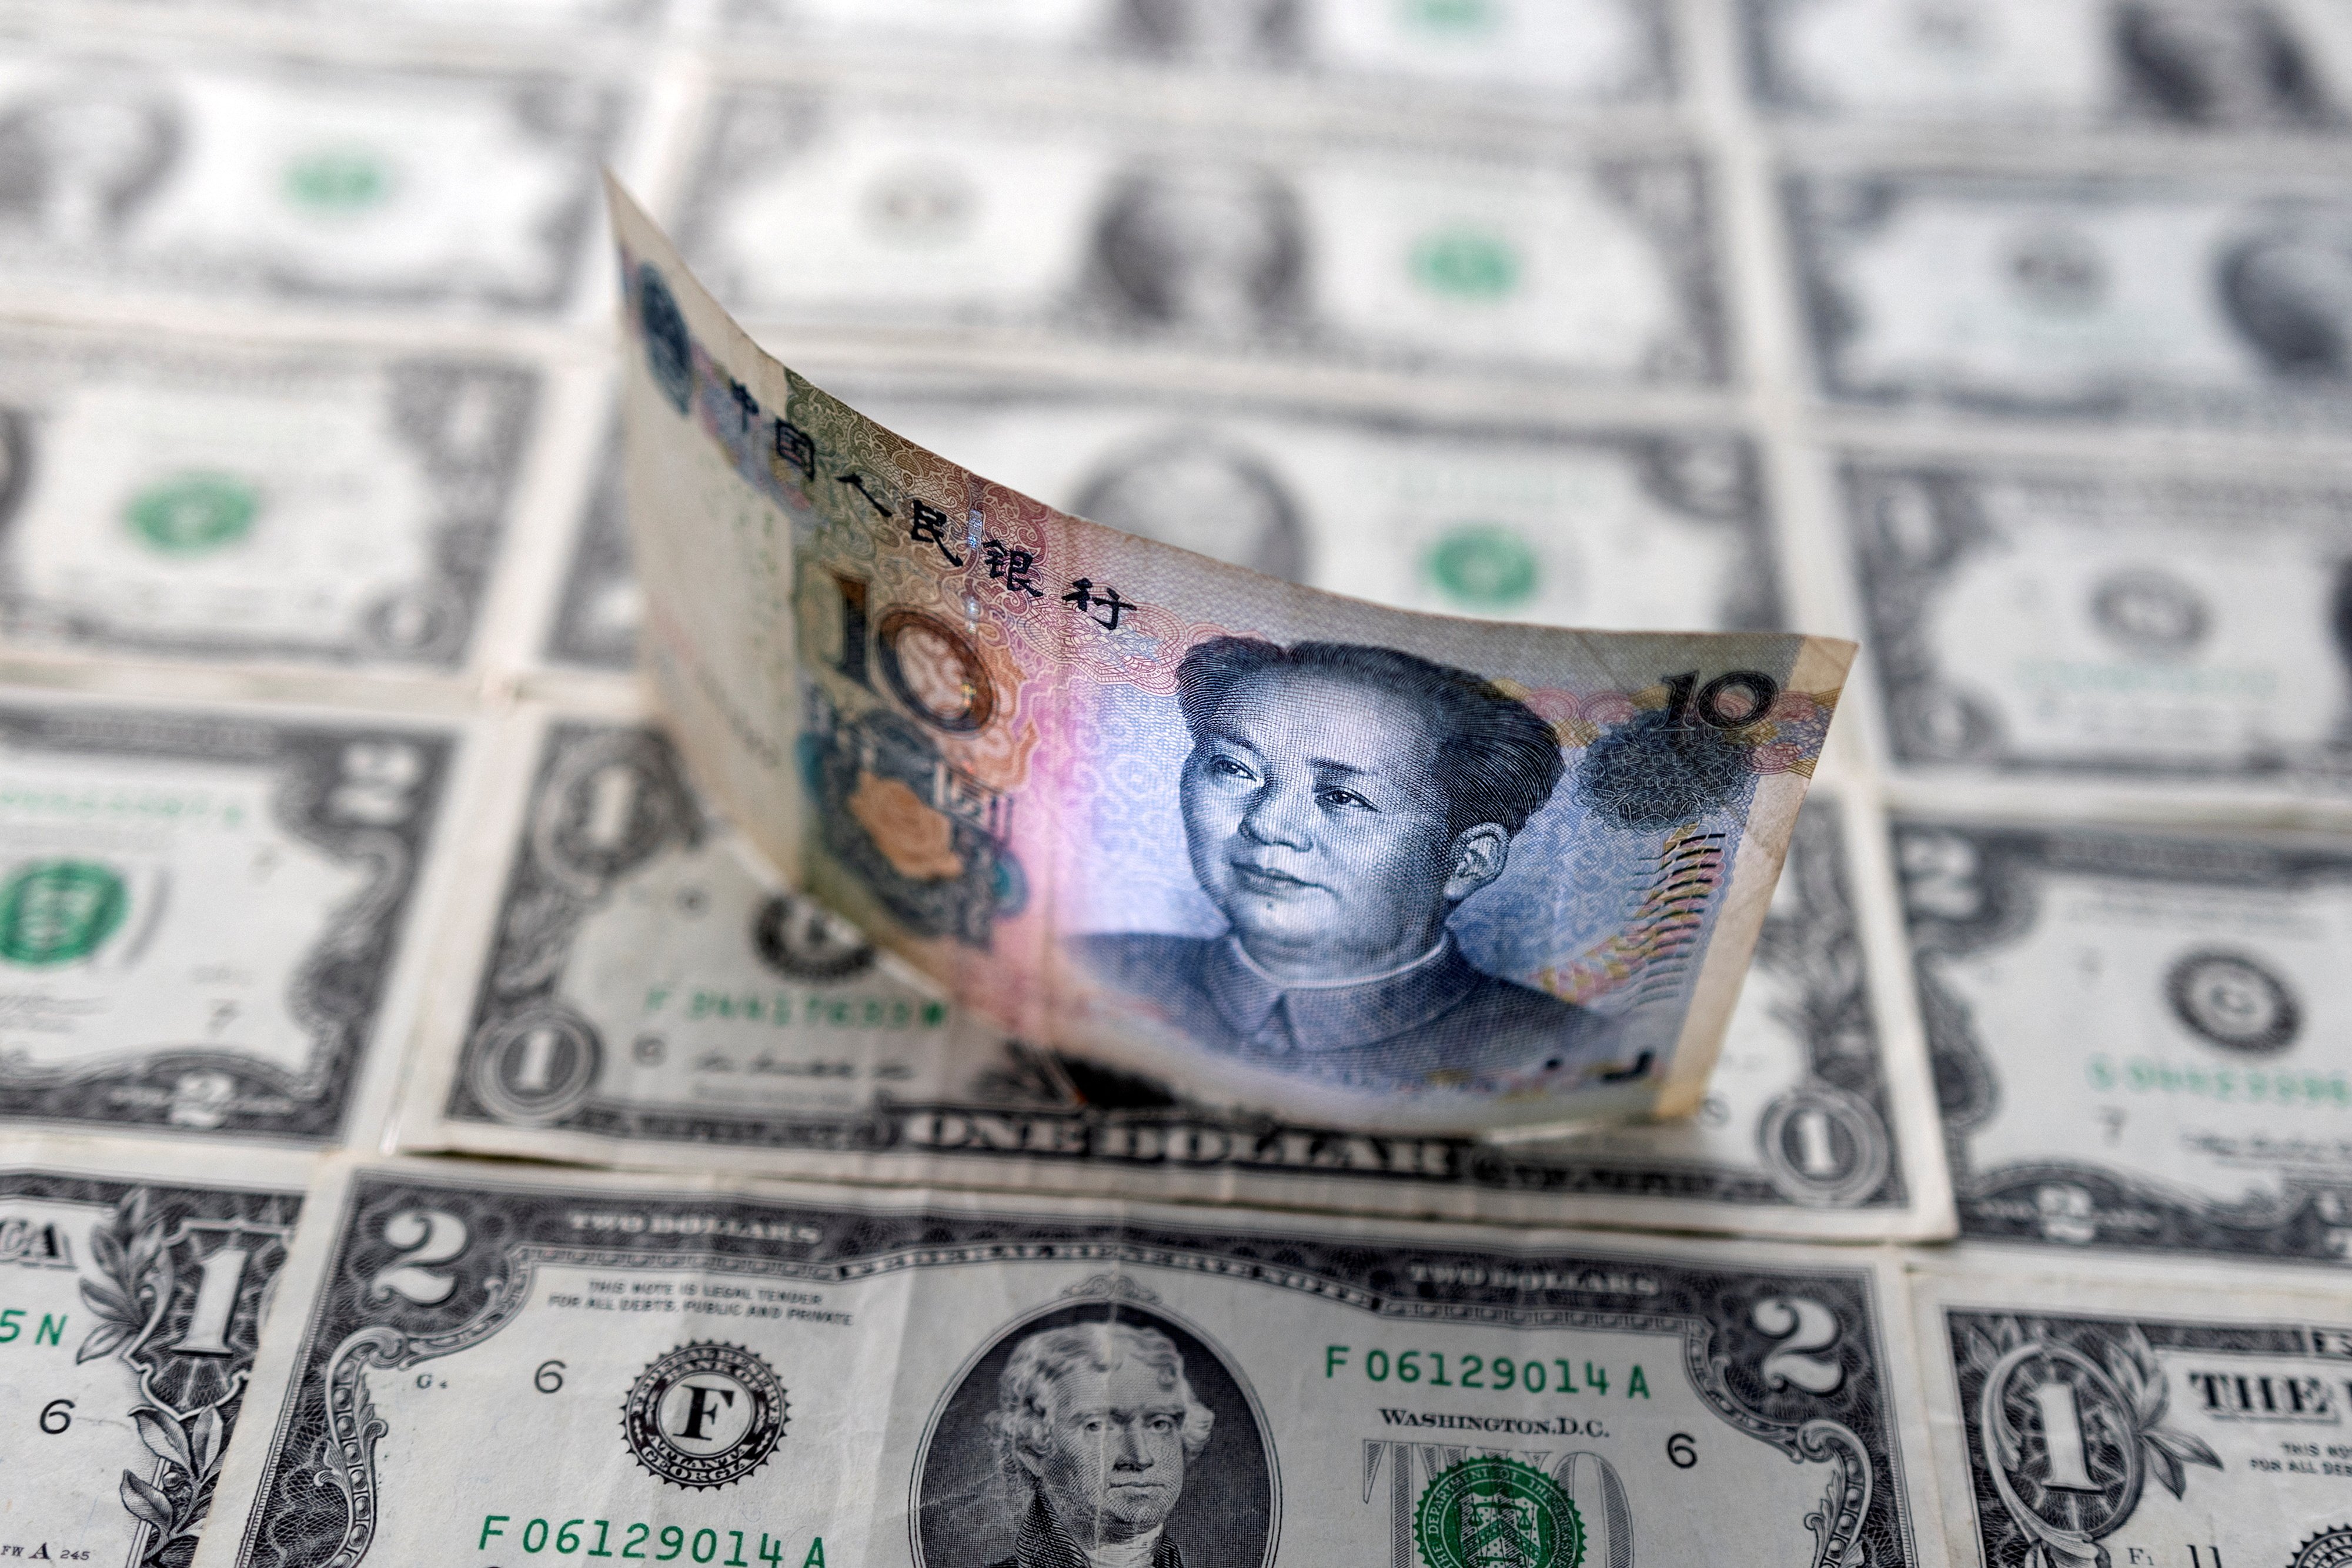 China has tried to boost the overseas use of its currency but is still restrained by yuan convertibility and its own capital controls. Photo: Reuters